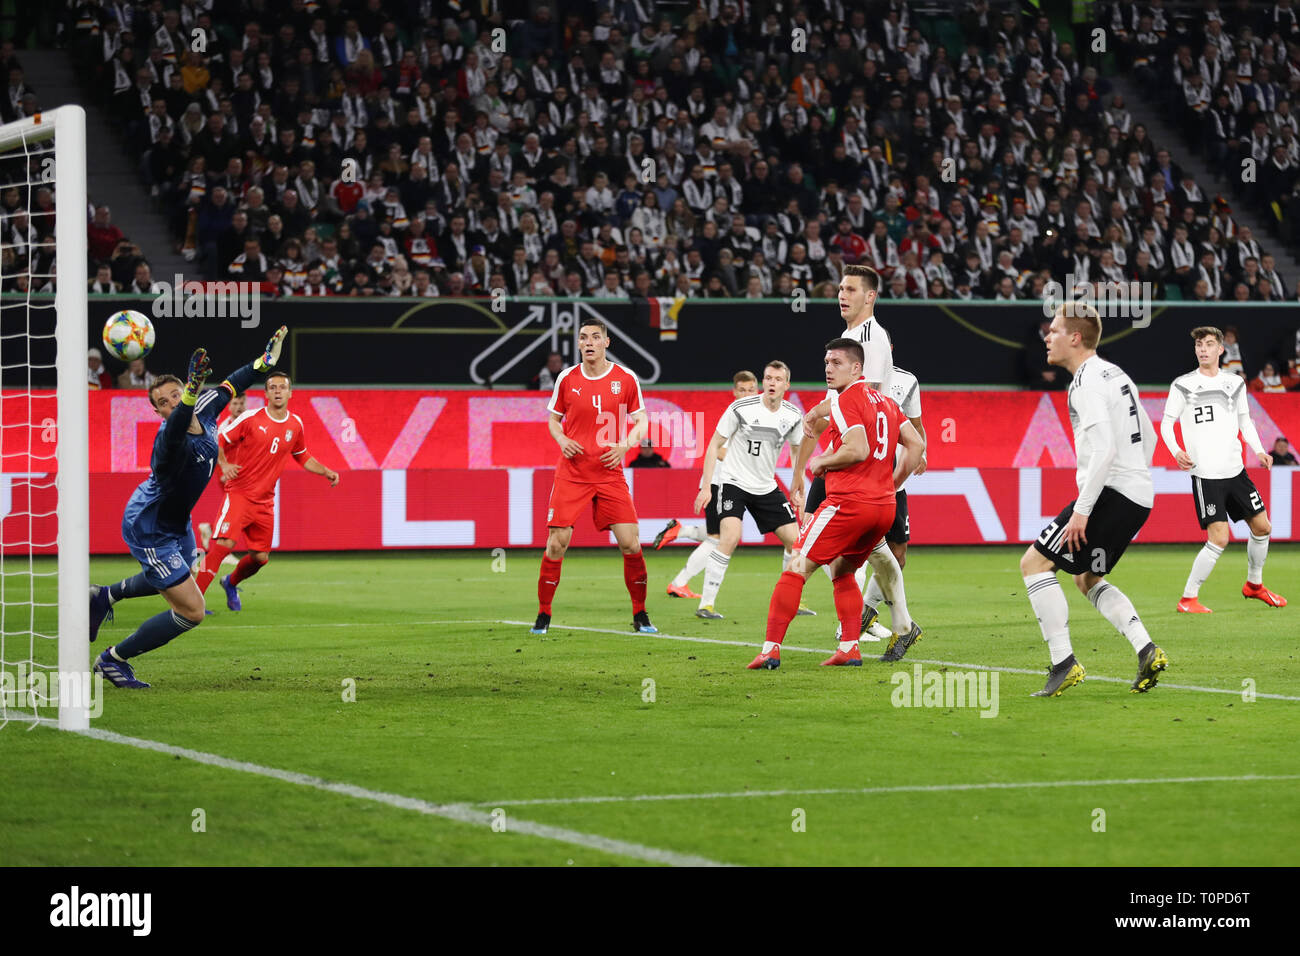 20 March 2019, Lower Saxony, Wolfsburg: Soccer: International match, Germany - Serbia in the Volkswagen Arena. Luka Jovic (3rd from right) from Serbia scores the goal for 0:1 against Germany's goalkeeper Manuel Neuer (left). Photo: Christian Charisius/dpa Stock Photo